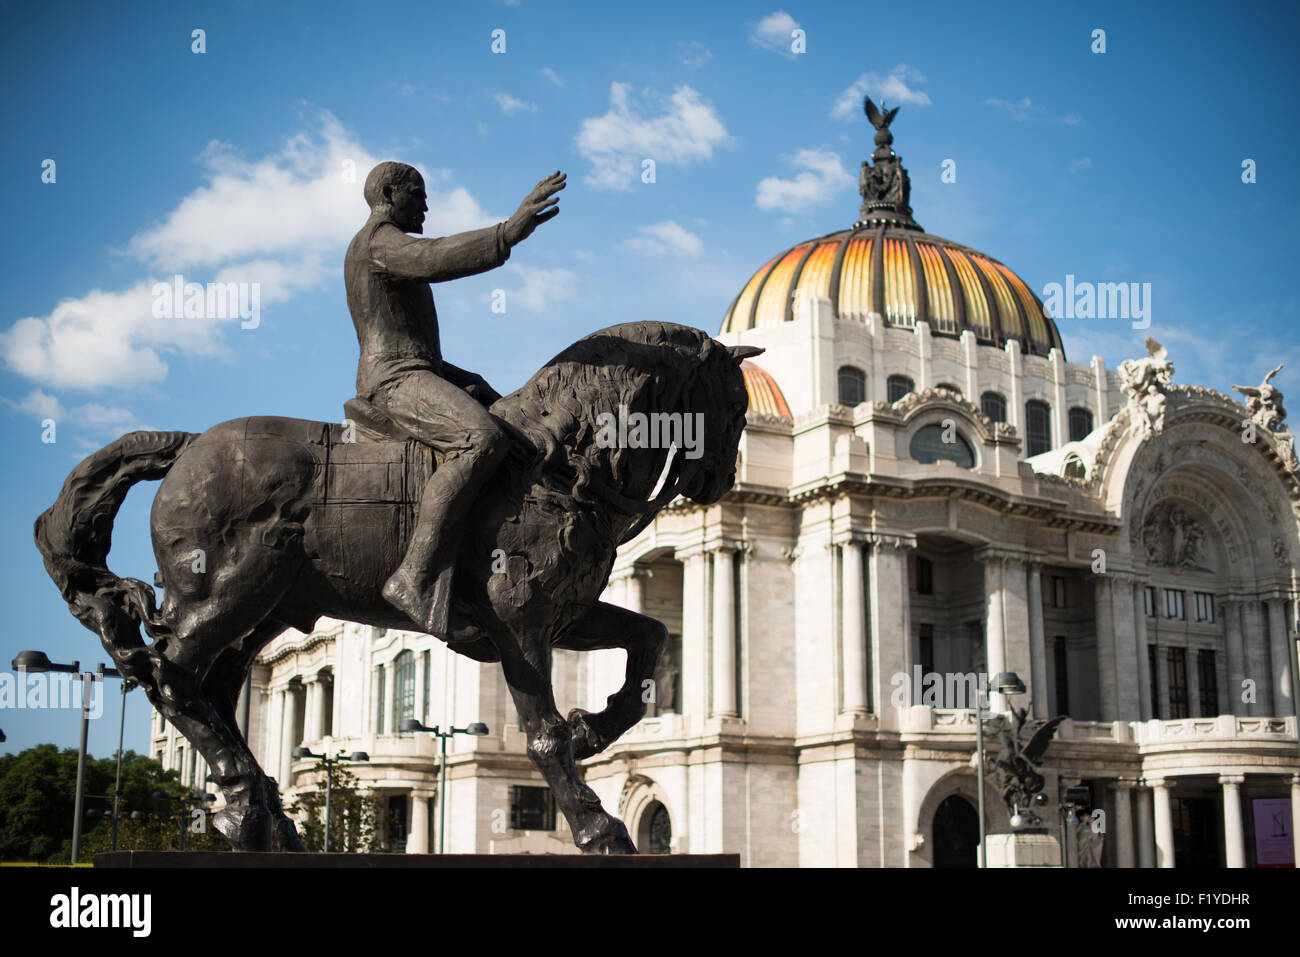 The Palacio de Bellas Artes (Palace of Fine Arts) is Mexico's most important cultural center. It's located on the end of Alameda Central park close to the Zocalo in Centro Historico. The building was completed in 1934 and features a distinctive tiled roof on the domes. Stock Photo